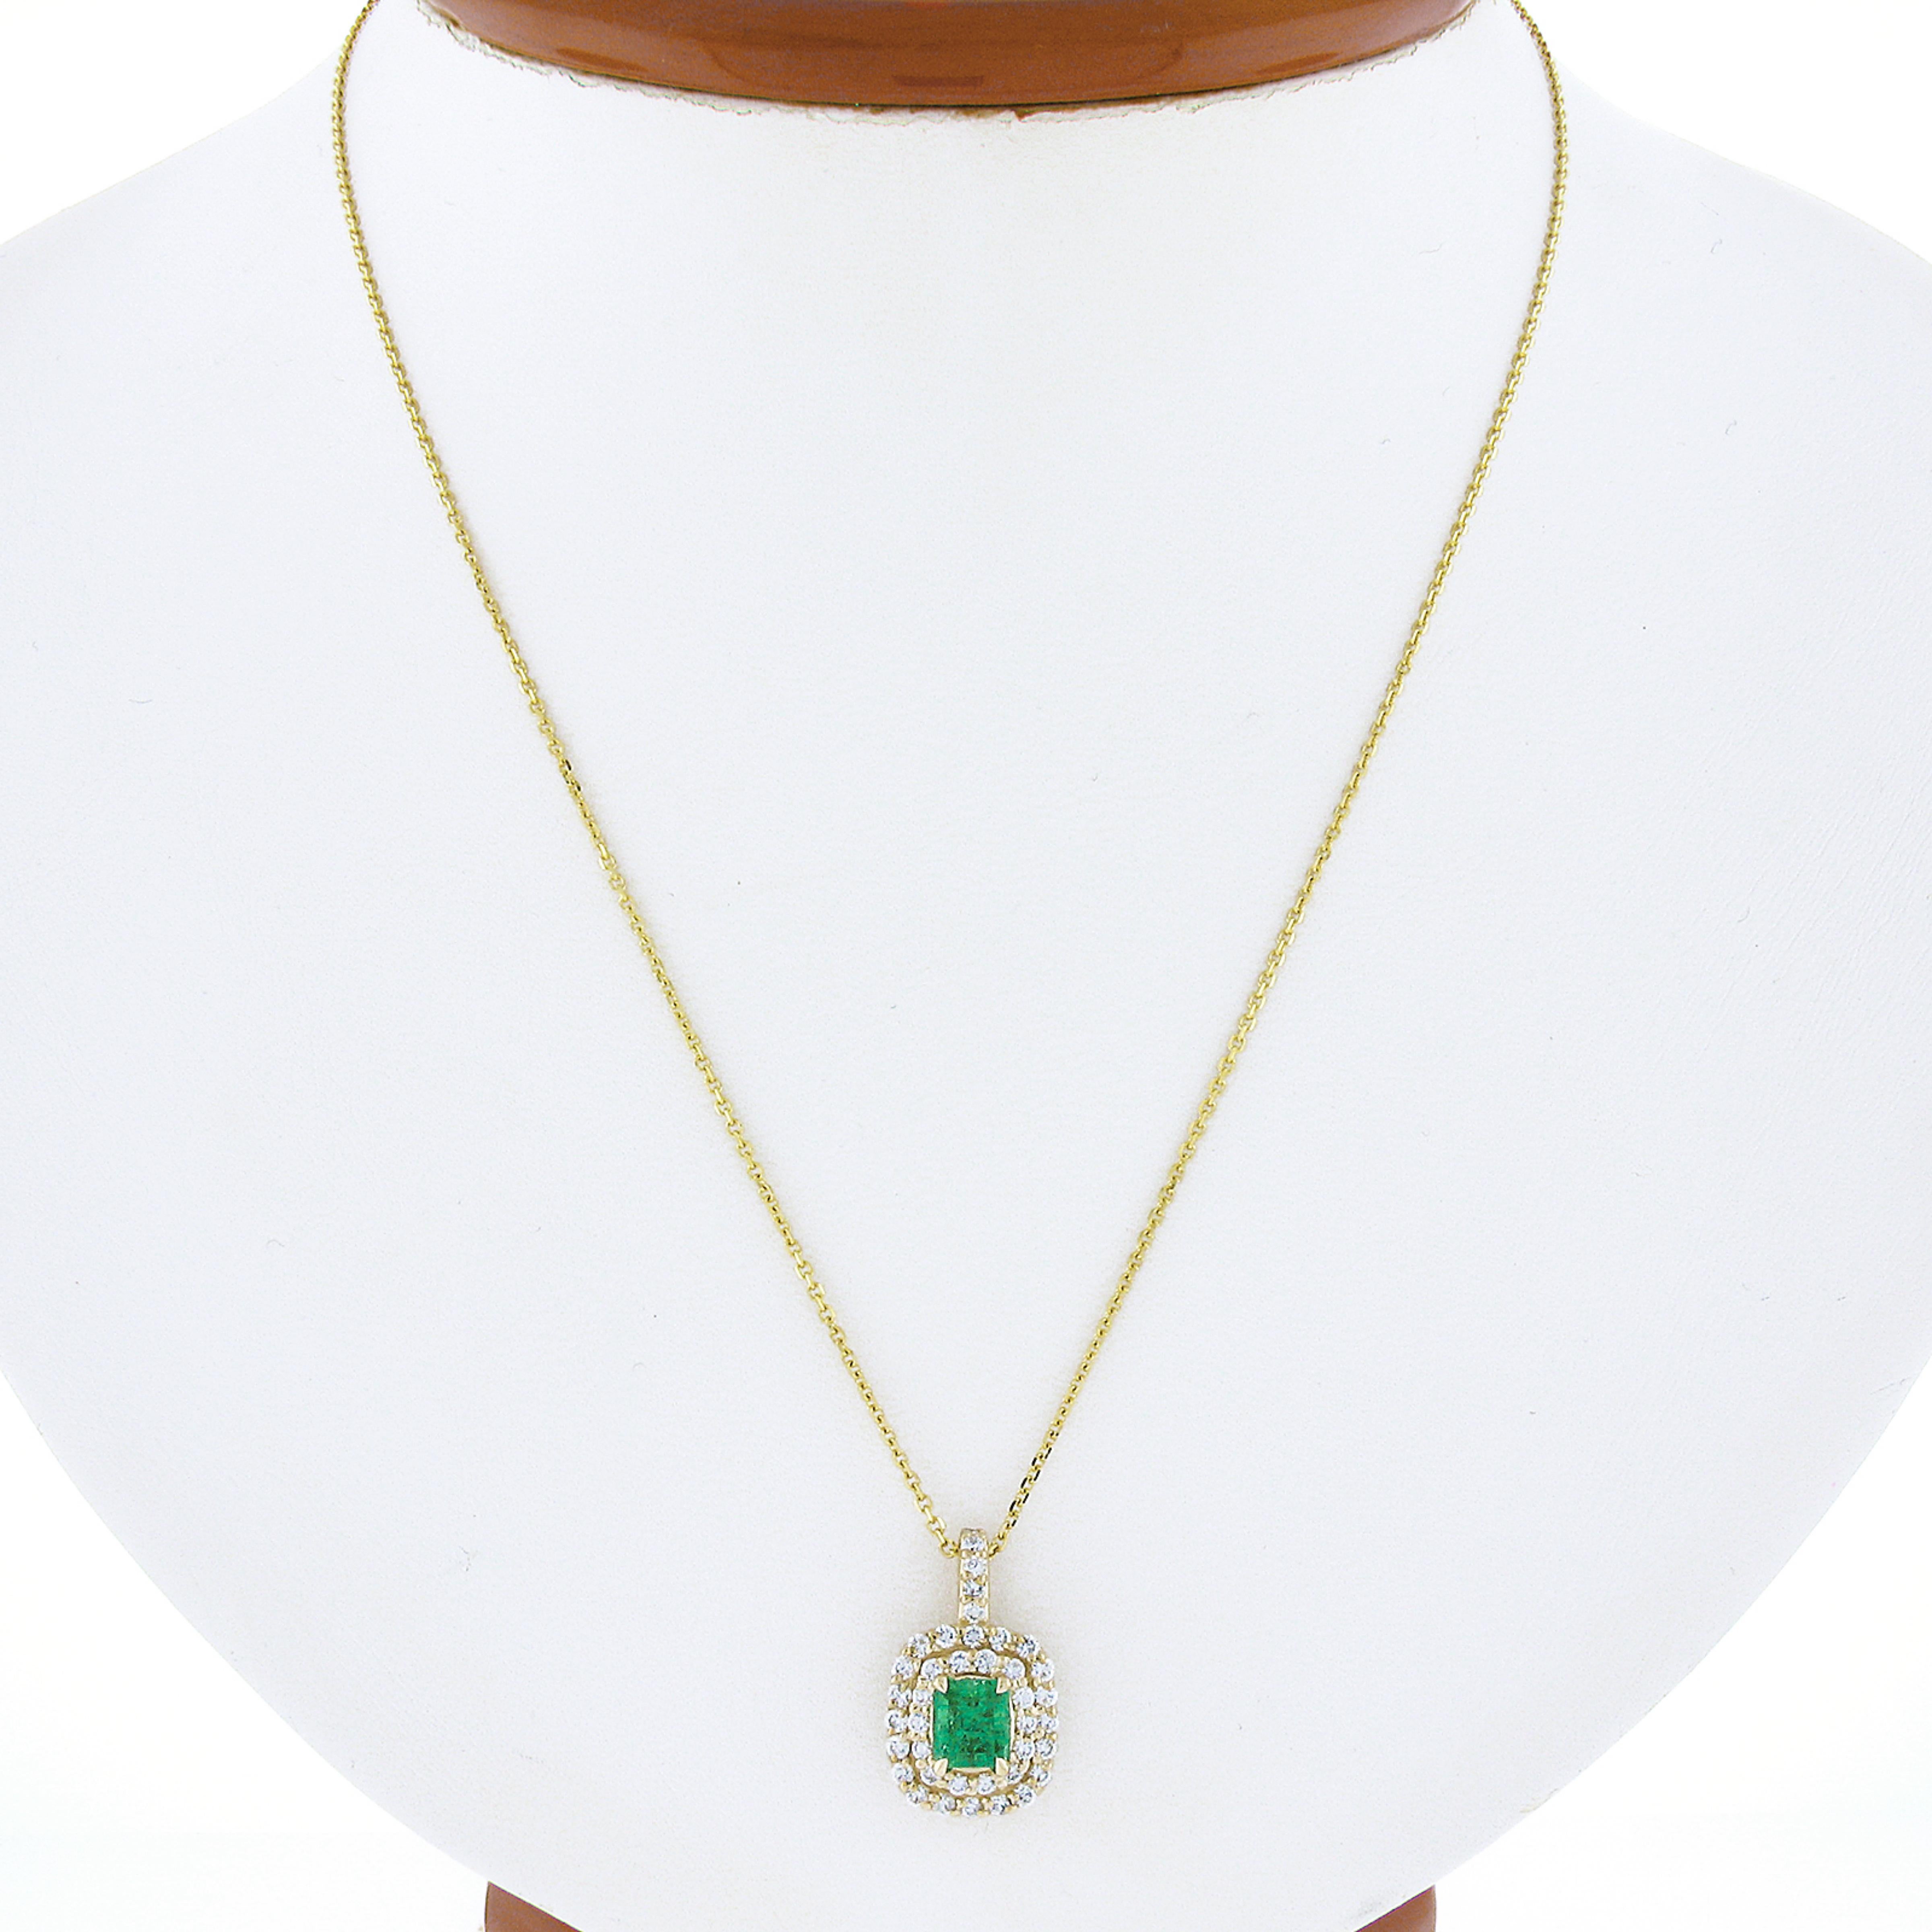 Here we have a gorgeous, custom made, emerald and diamond cushion shaped pendant newly crafted in solid 14k yellow gold. The fine quality emerald solitaire is GIA certified at weighing 0.77 carat, and displays truly wonderful vibrant green color